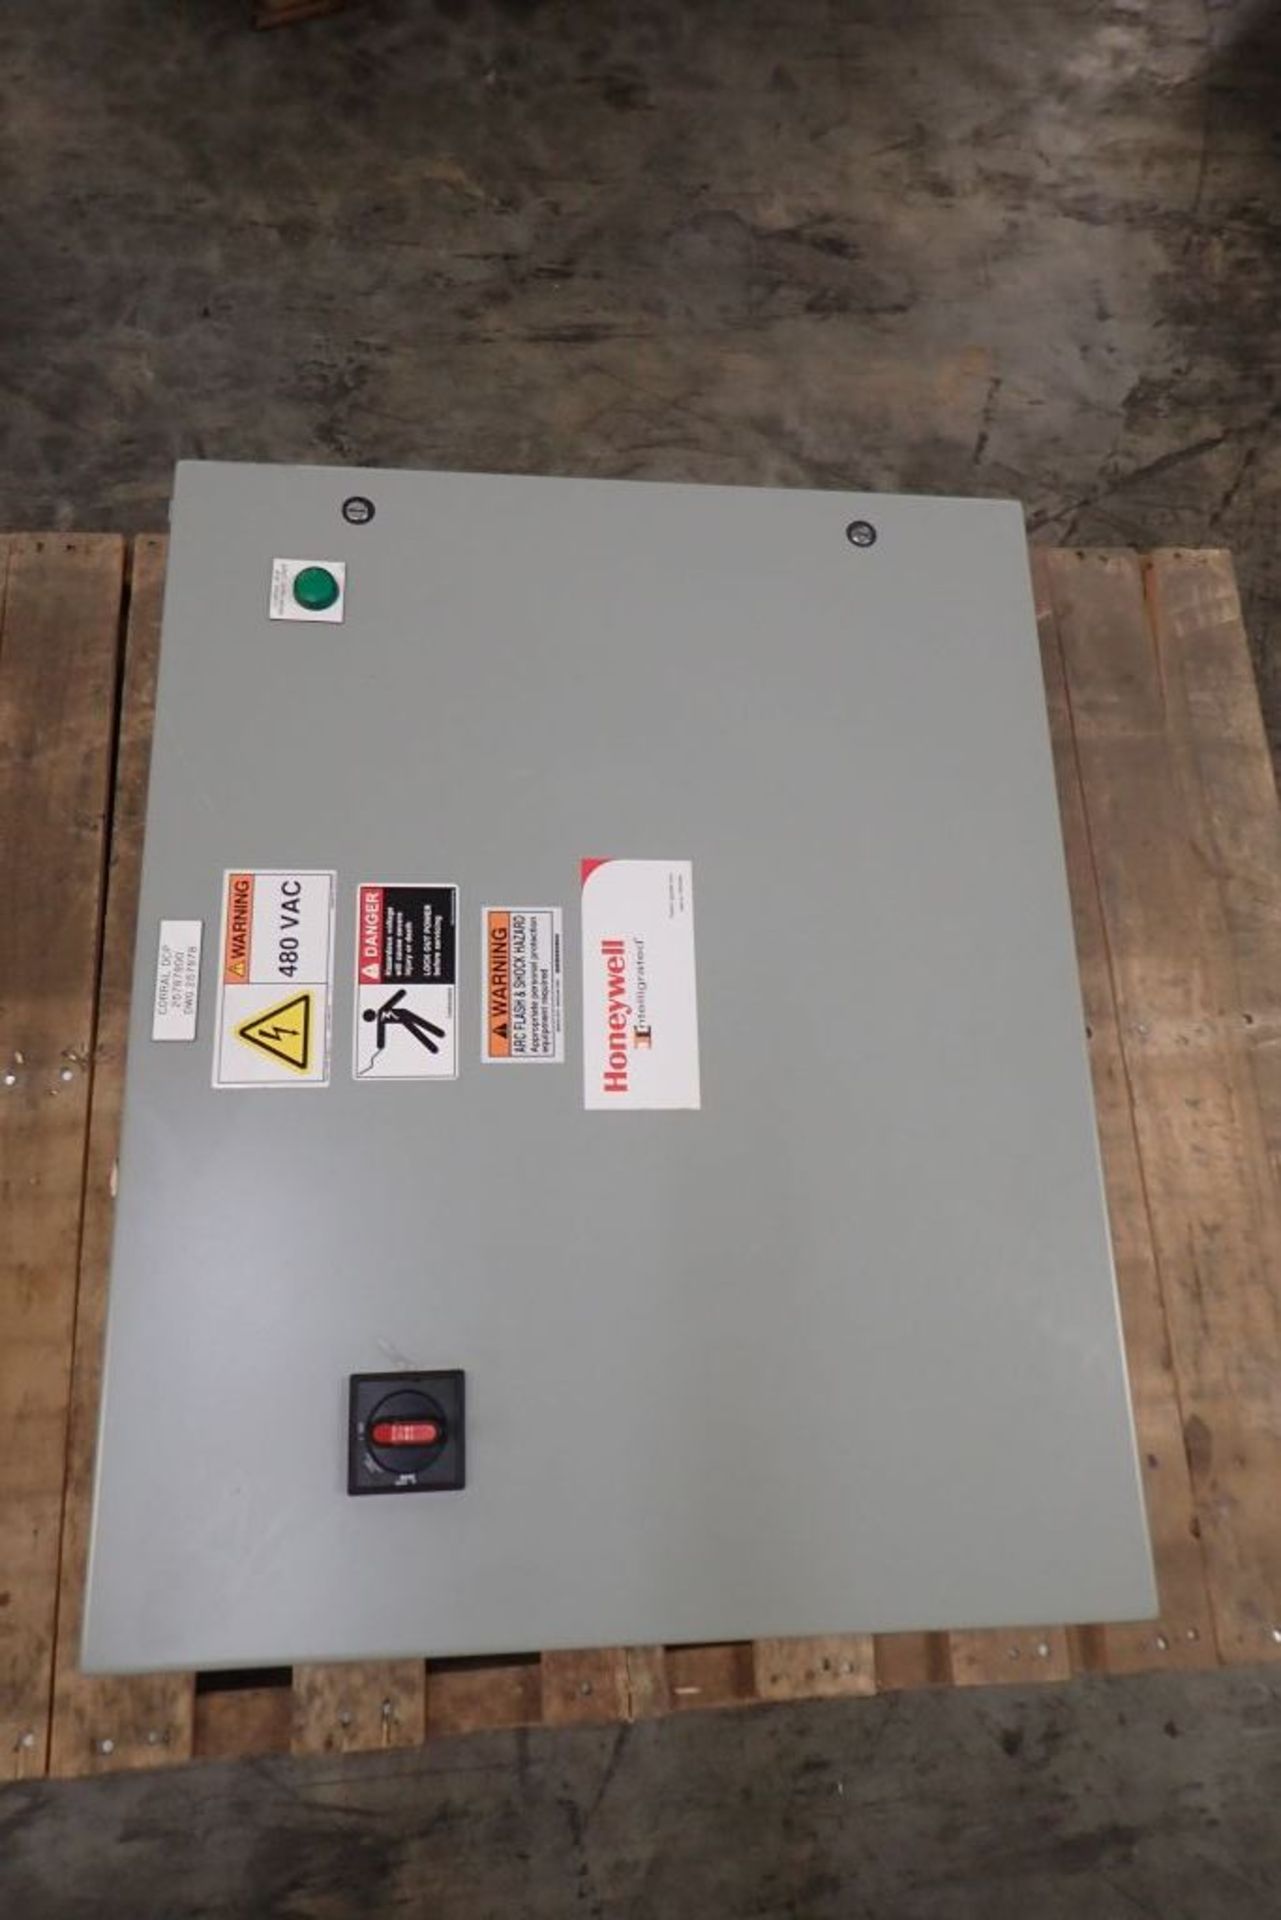 Hoffman Nvent Industrial Control Panel Enclosure with Contents - Image 2 of 6